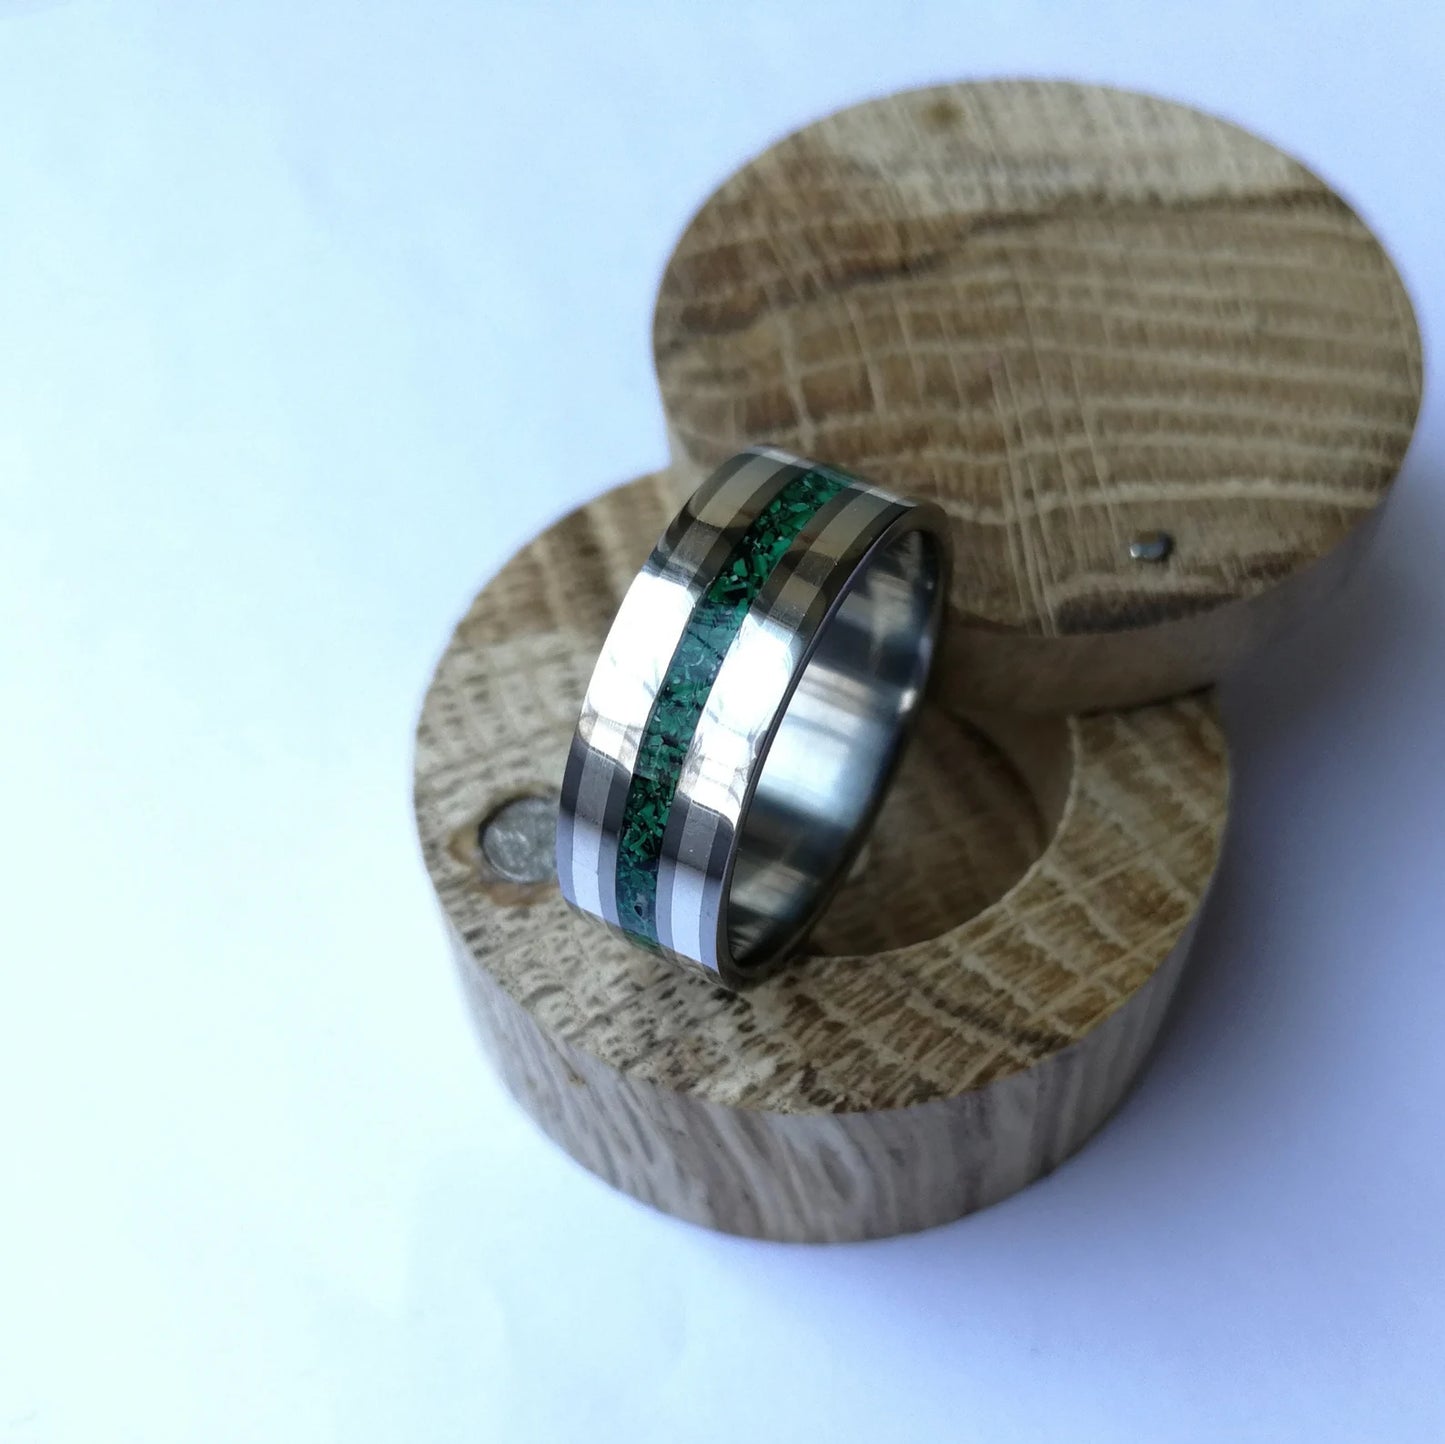 Unique Handmade Titanium Ring with Selected Outer Inlays and Center Malachite Inlay.